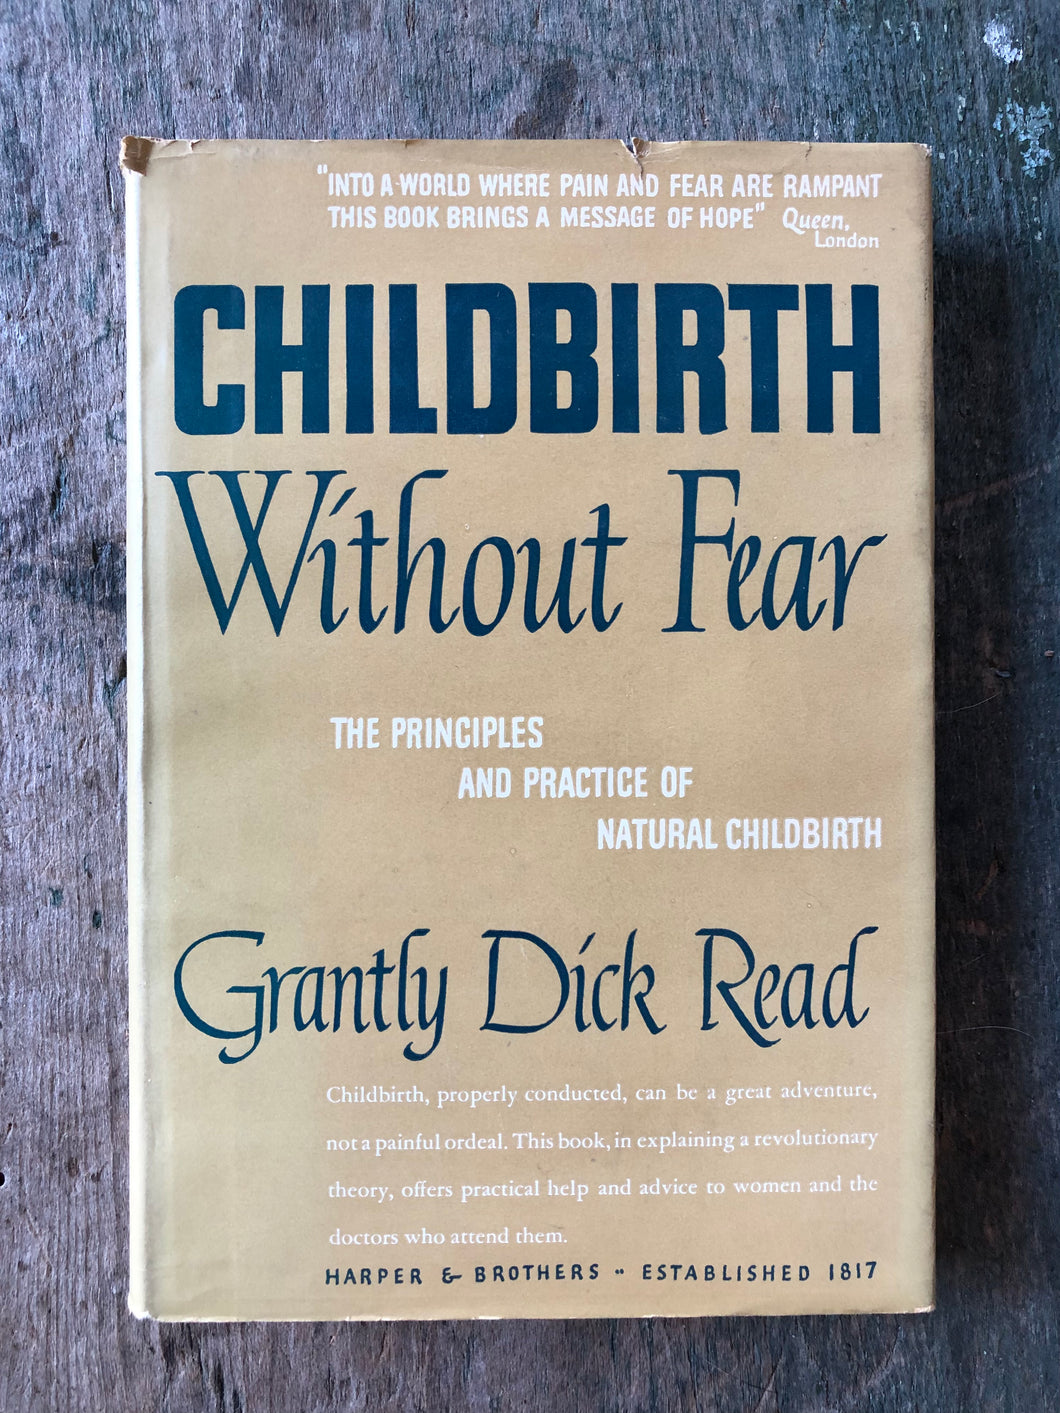 Childbirth Without Fear: The Principles and Practice of Natural Childbirth by Grantly Dick Read